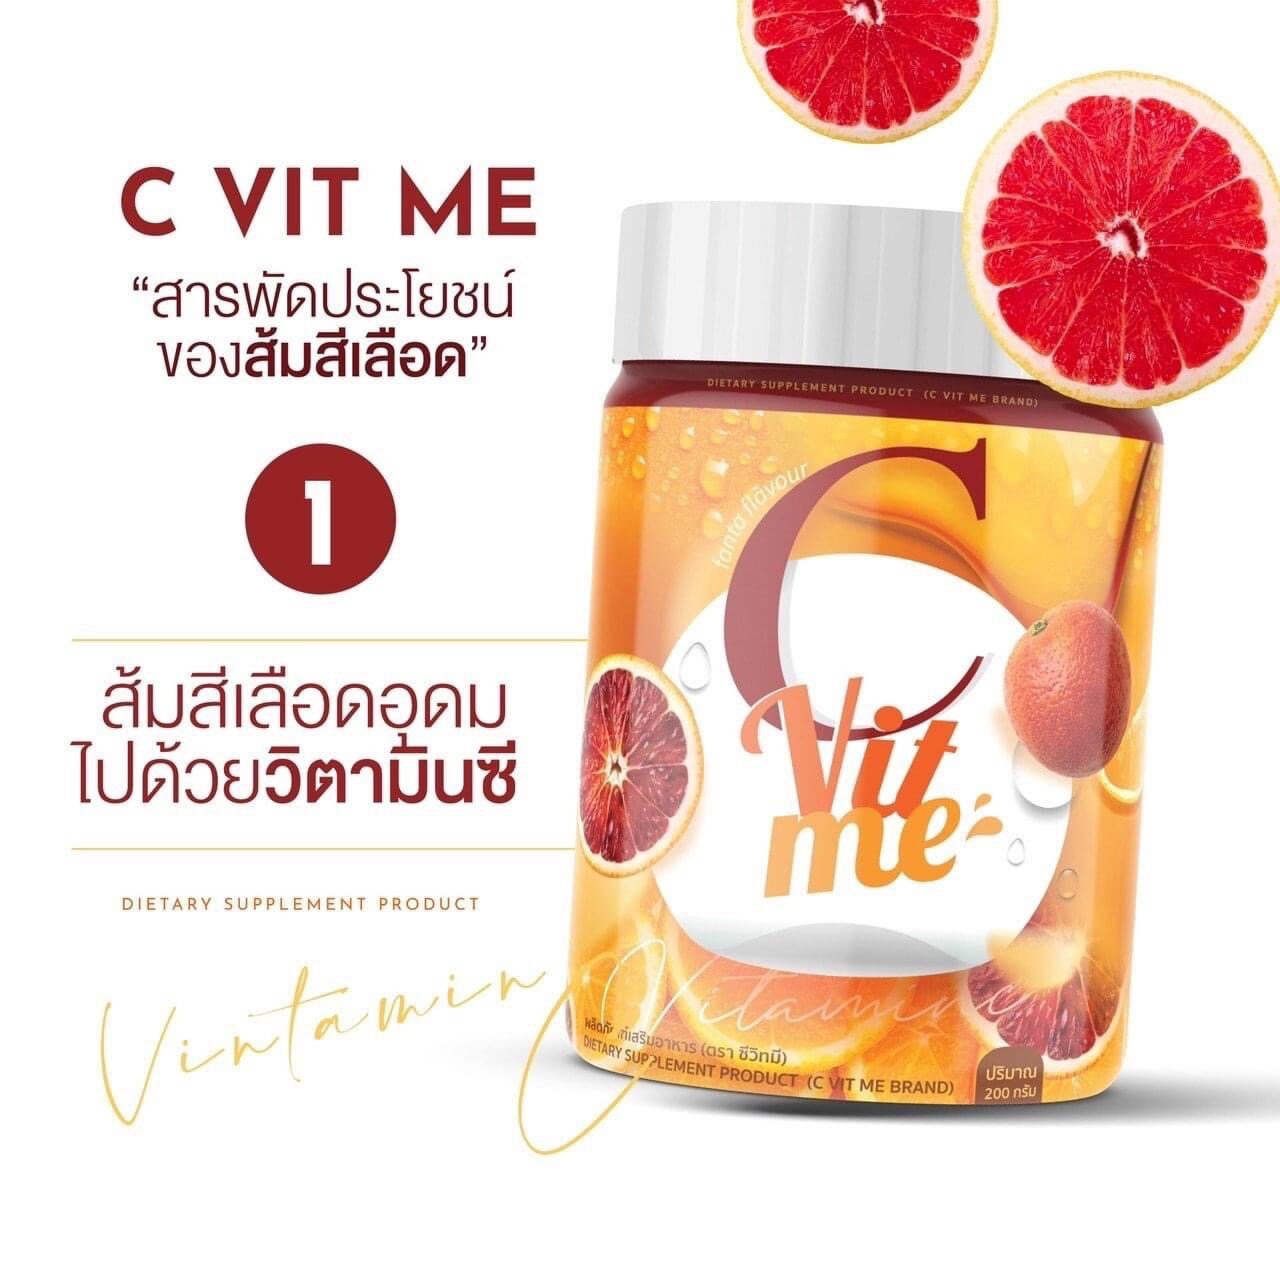 Dietary supplement packed with orange extracts and vitamin C